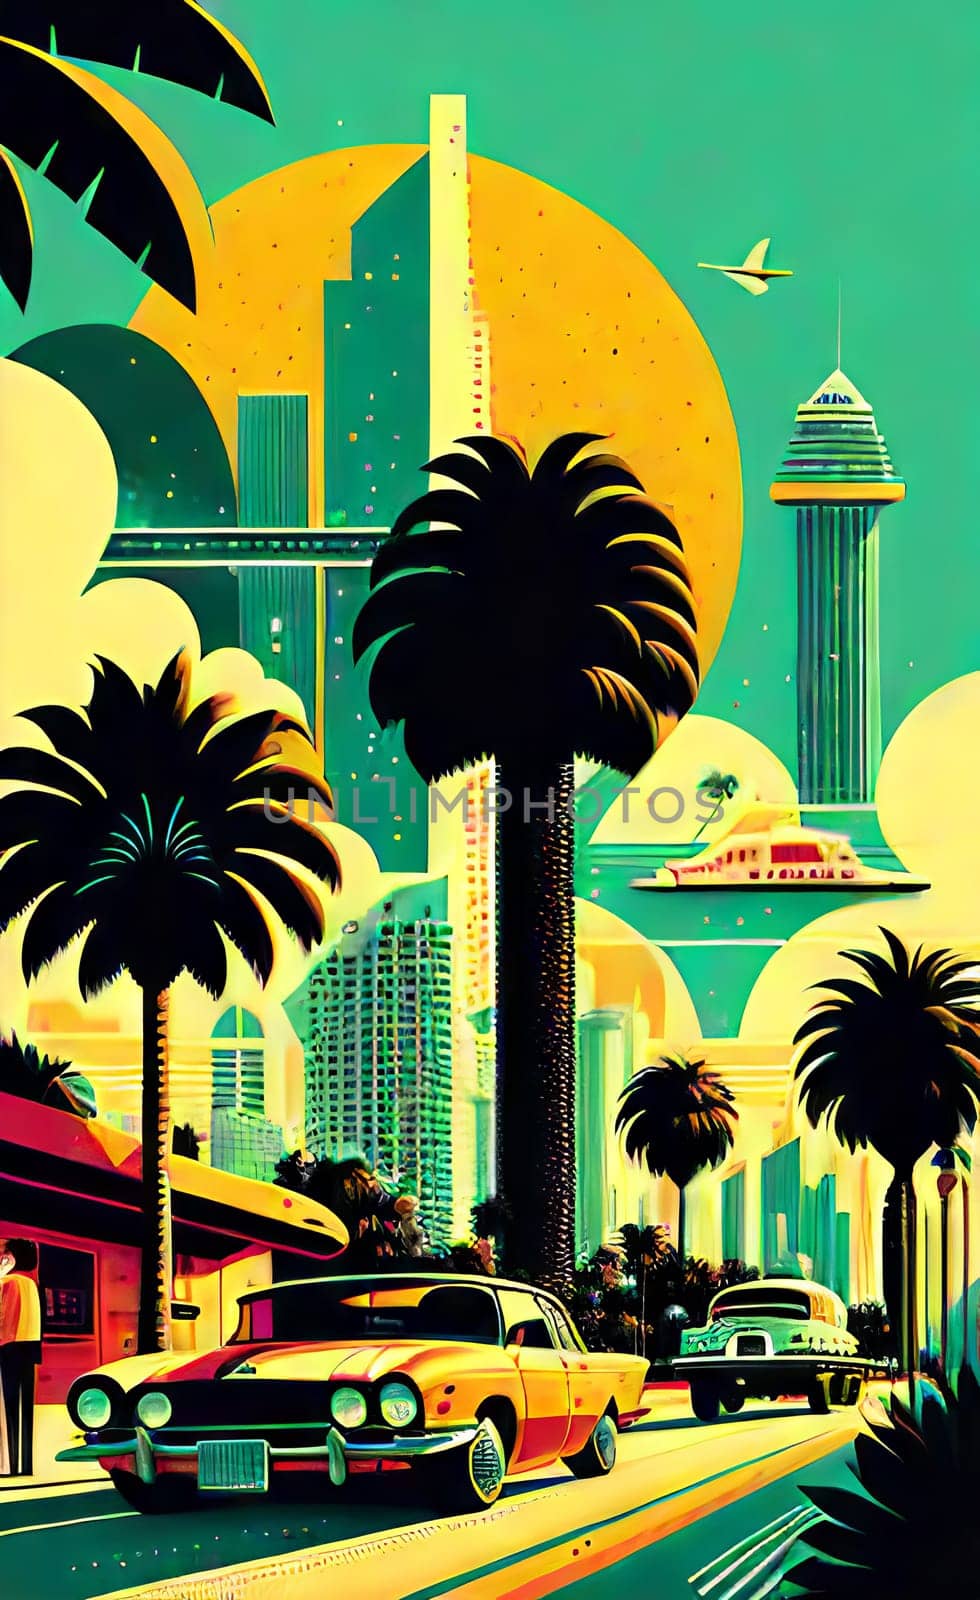 Art drawing - a city with cars and palm trees. Poster in retro style, with retro cars. Landscape of the city of Miami in a hand-drawn style. AI generation